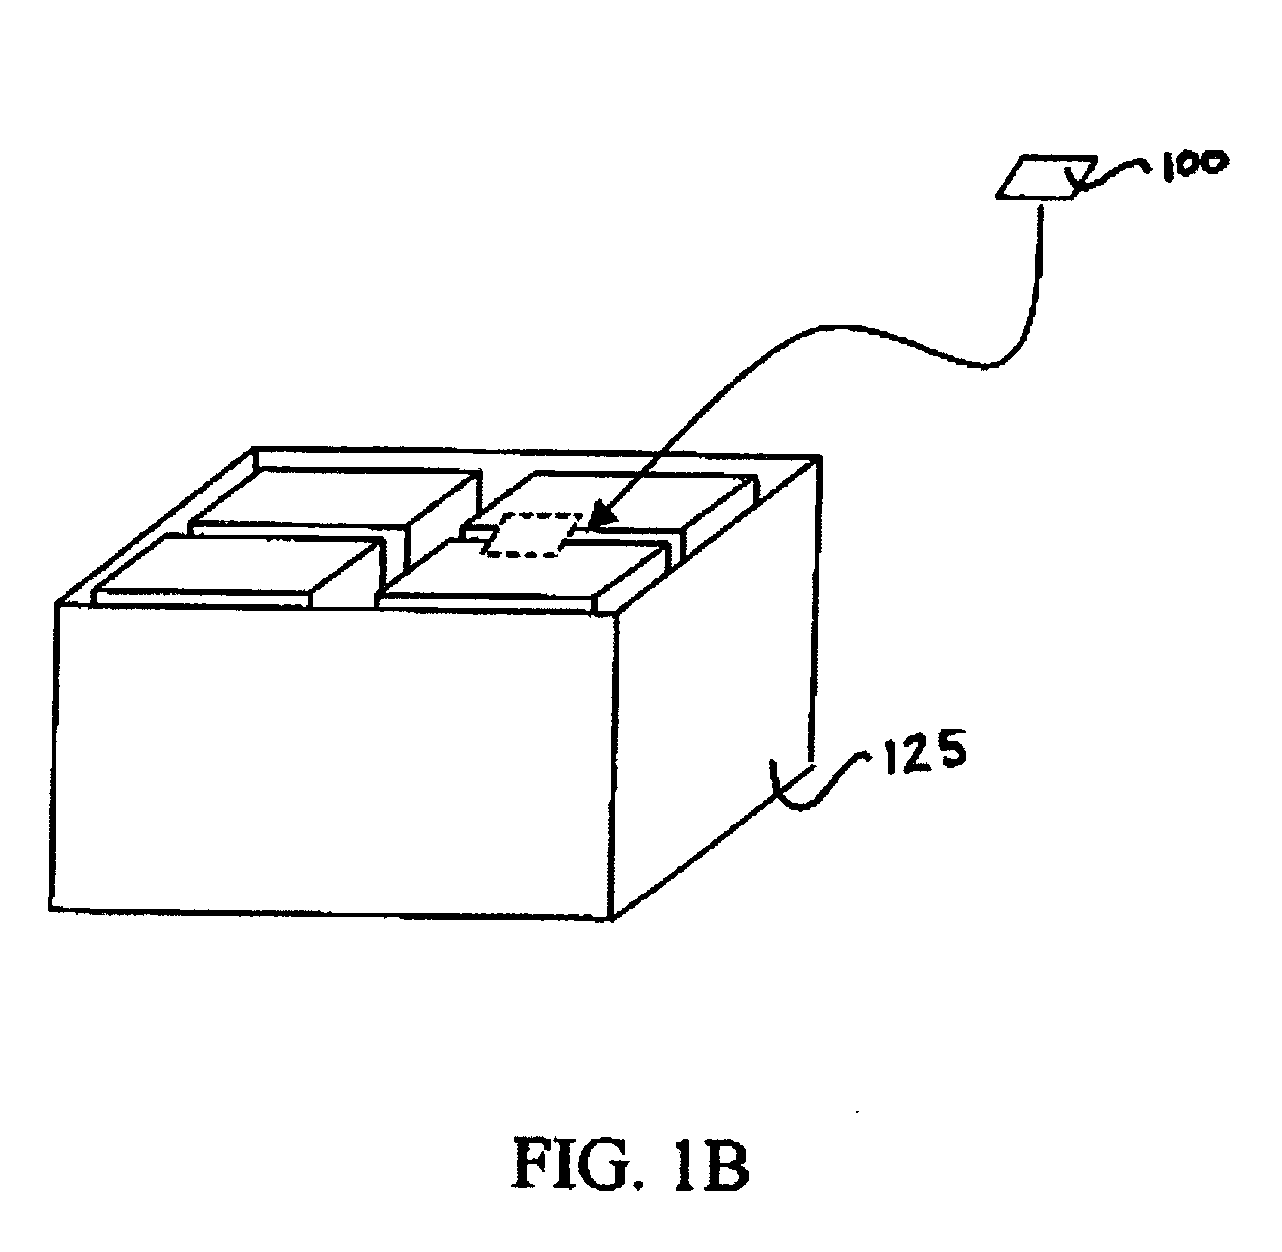 Package insert with integrated radio frequency transponder